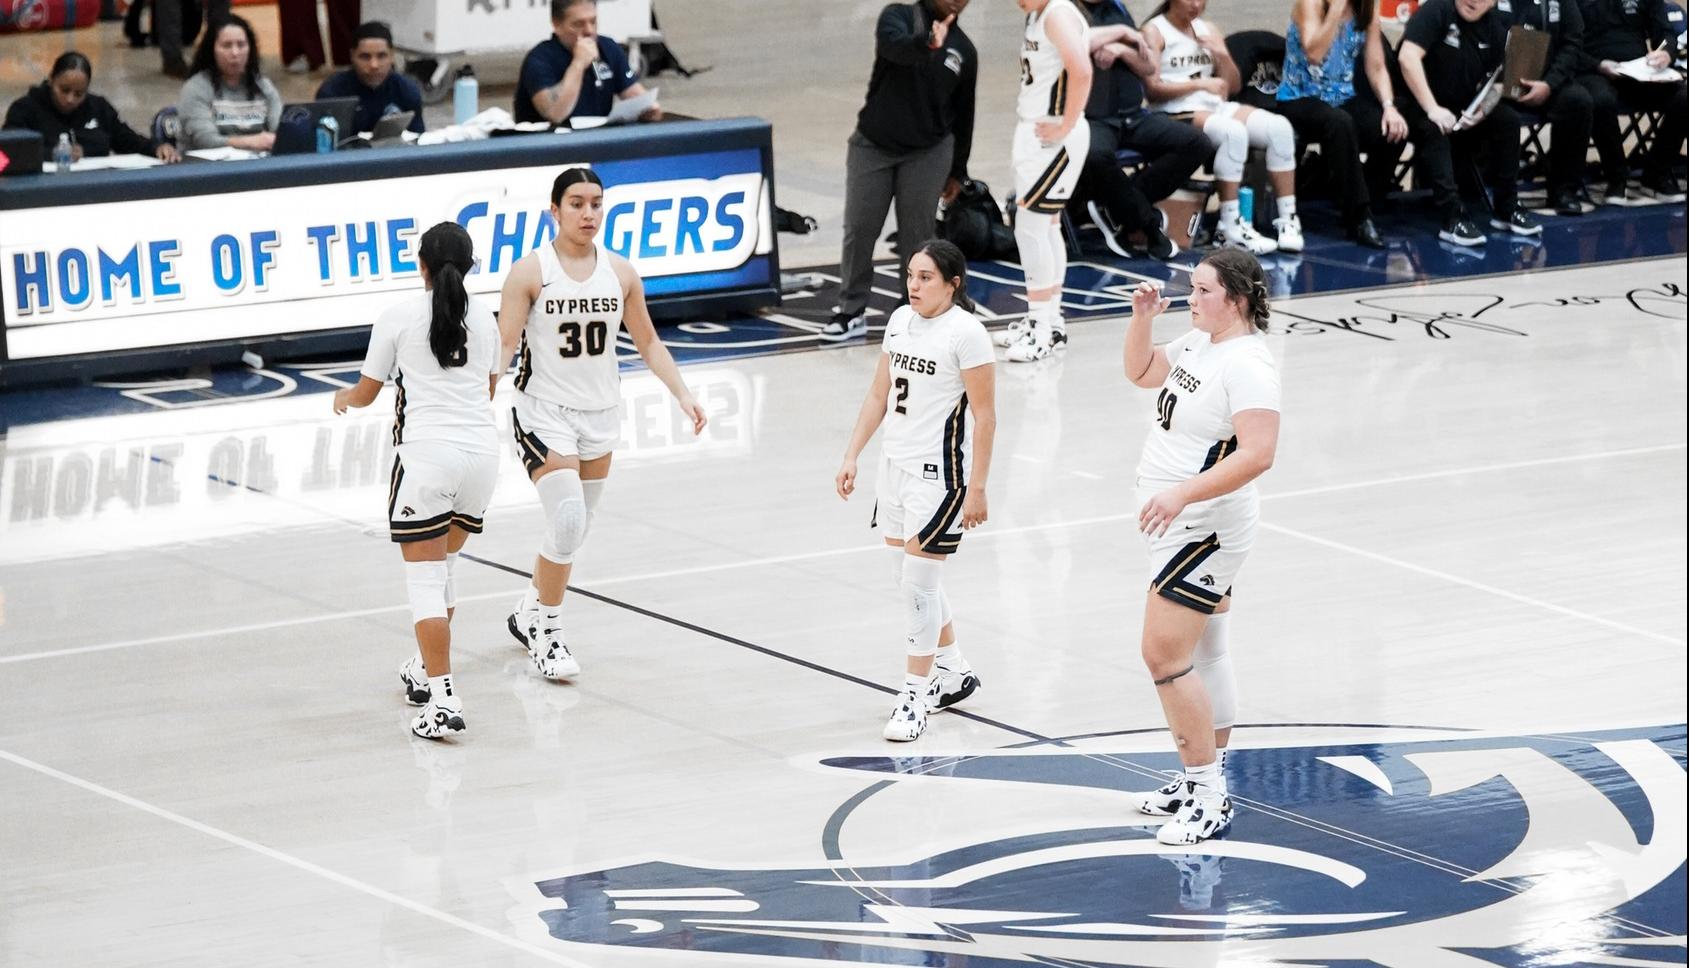 Chargers Win Big for First Conference Victory